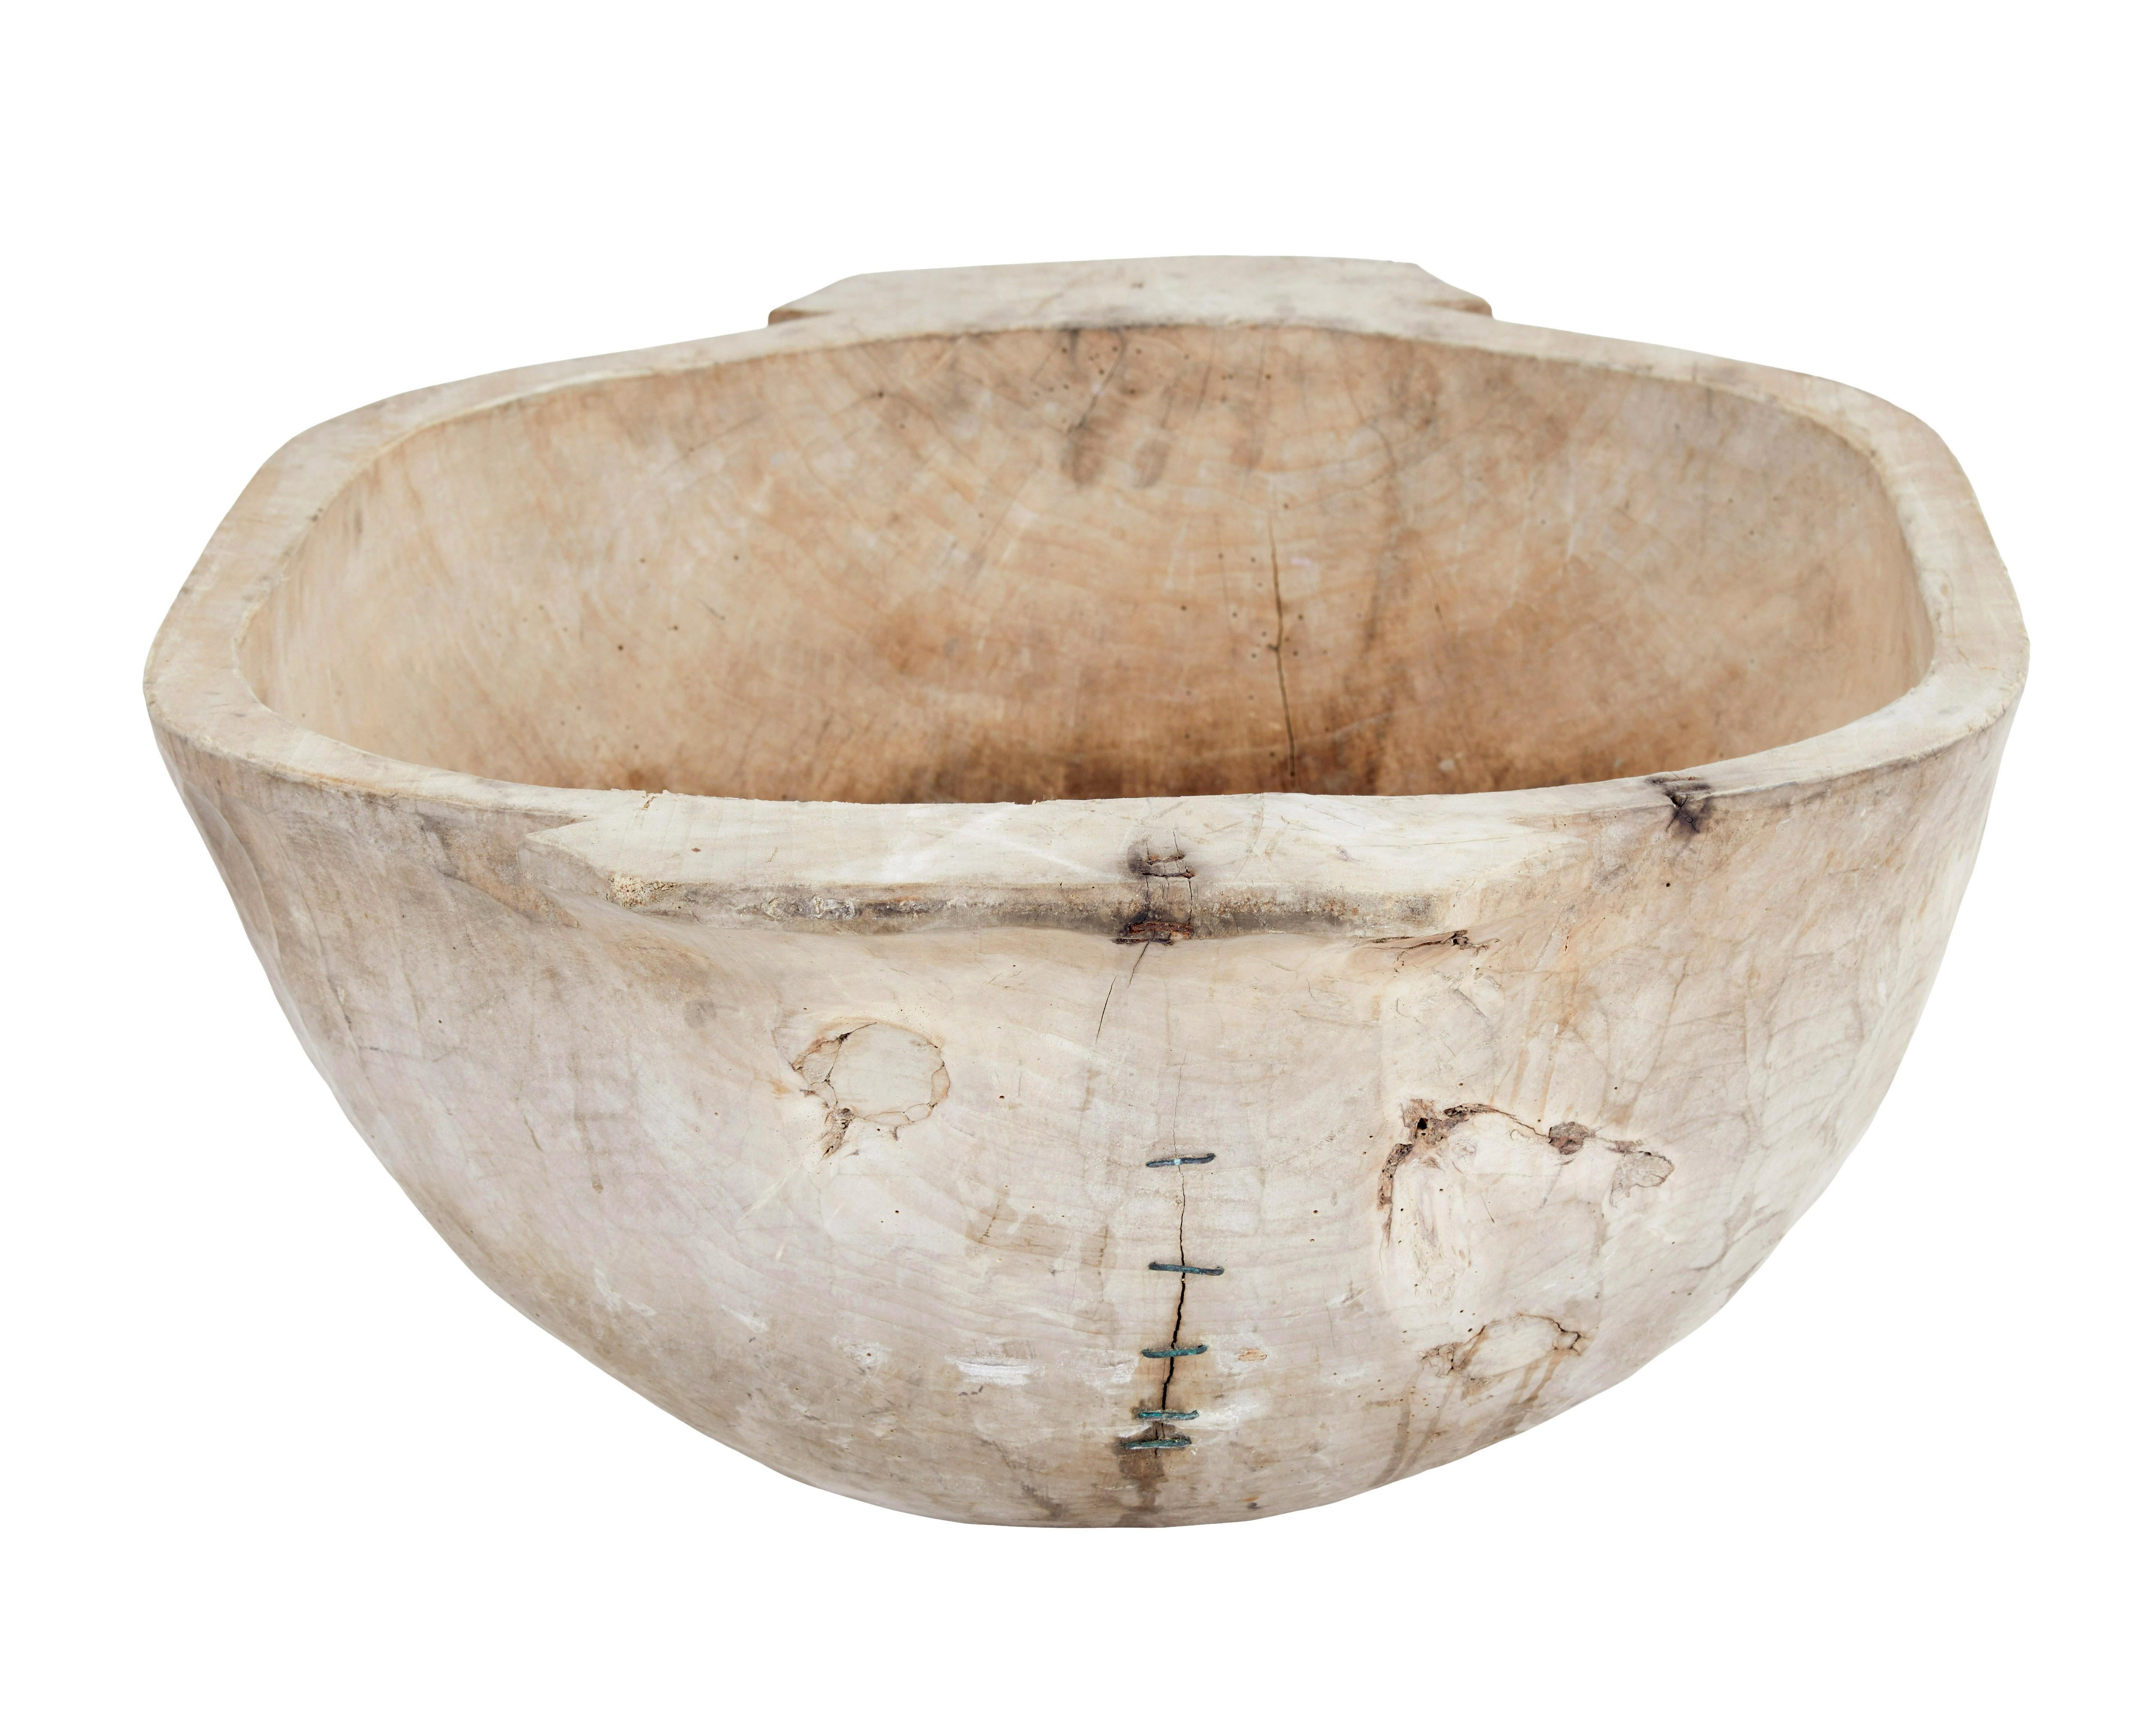 Early 20th century hand carved solid wood vessel circa 1900.

Here we have a large over sized bowl, which would have been used to feed livestock at the turn of the 20th century.

Hand carved from a solid piece of wood, with a carrying handle each